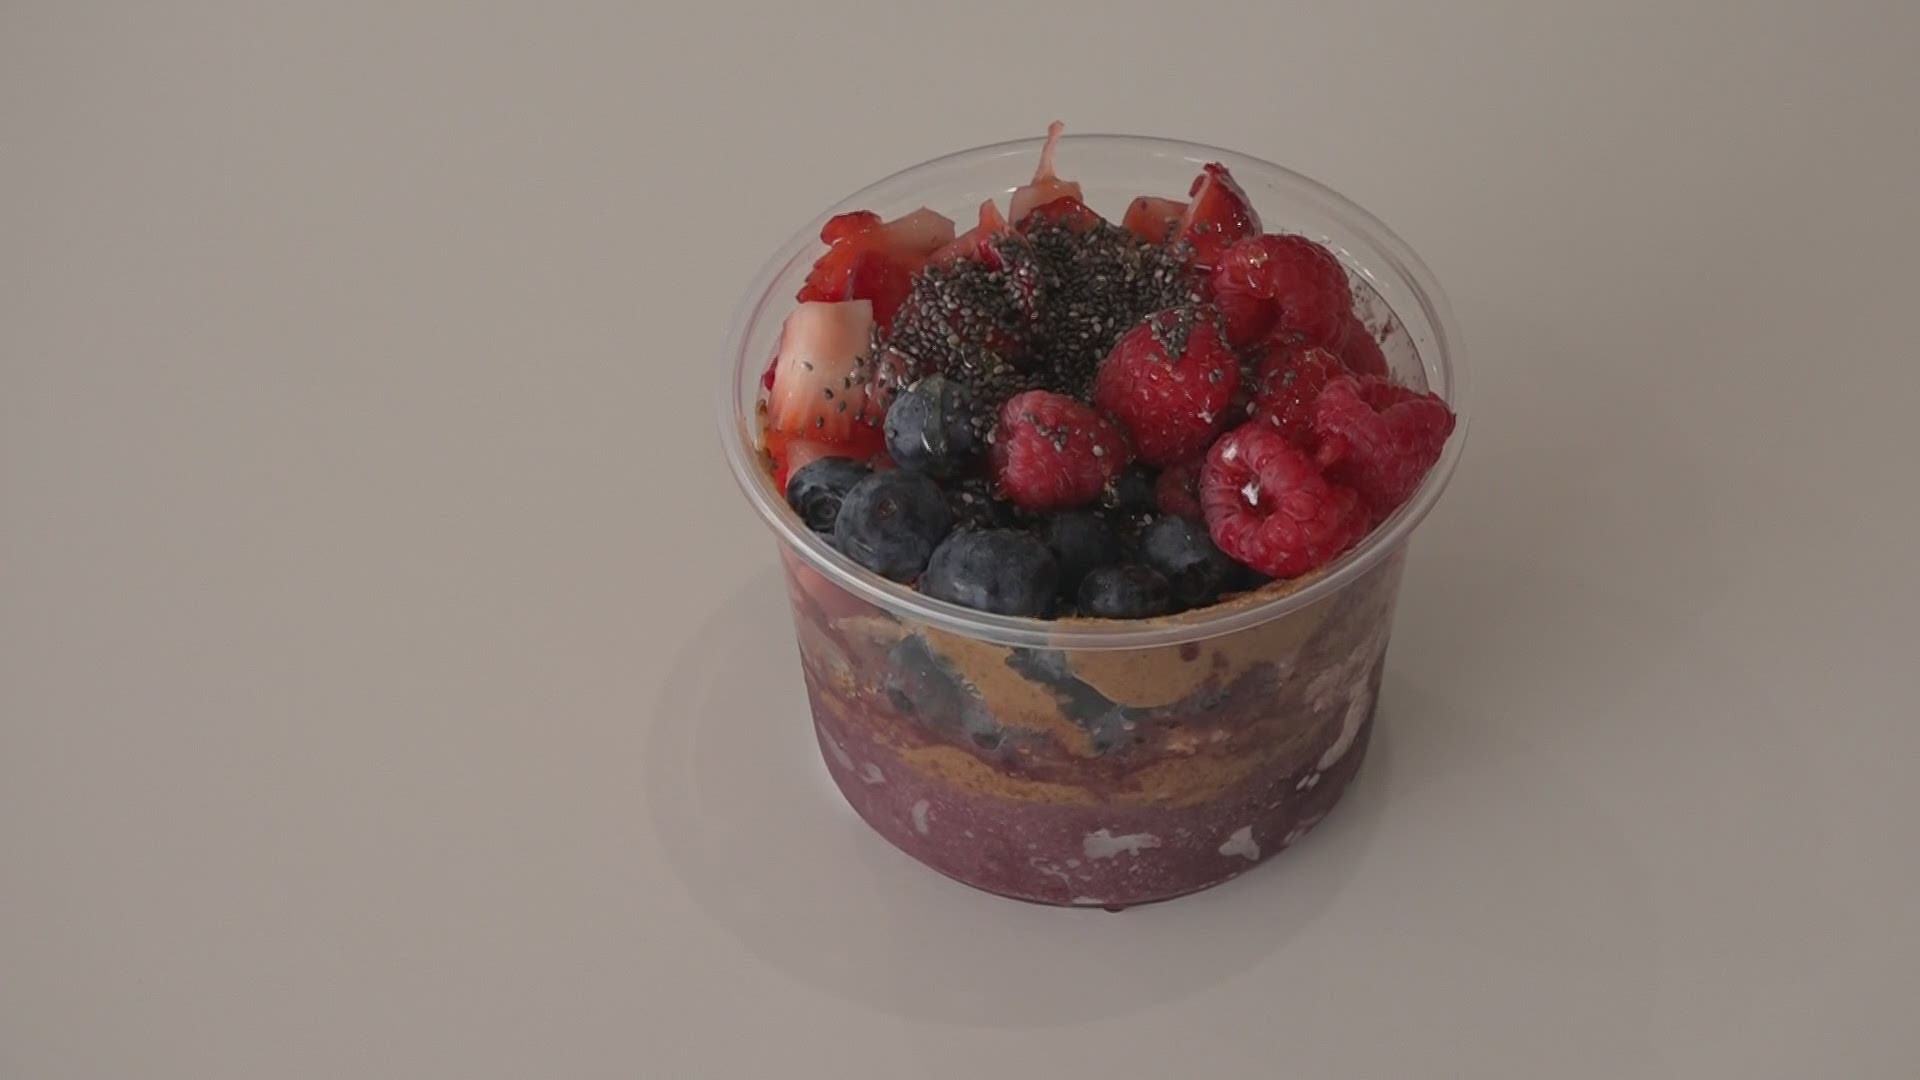 In an effort to help you eat healthier this summer, we’re offering simple recipes you can make at home, beginning with an Acai Bowl from Top This in Grand Rapids.